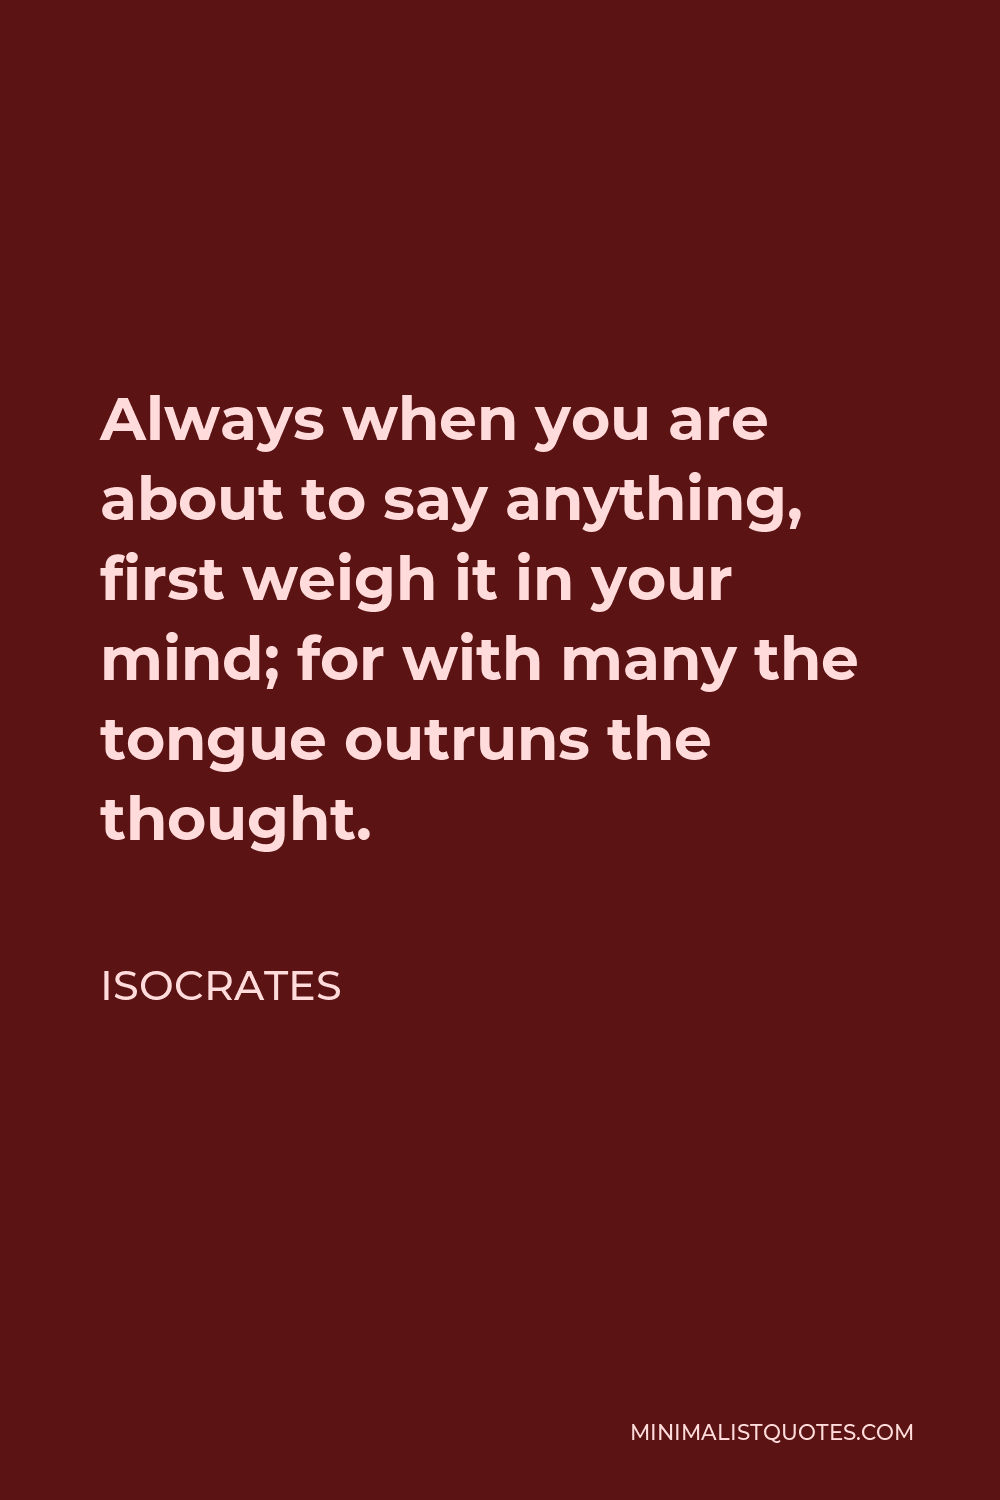 Isocrates Quote - Always when you are about to say anything, first weigh it in your mind; for with many the tongue outruns the thought.